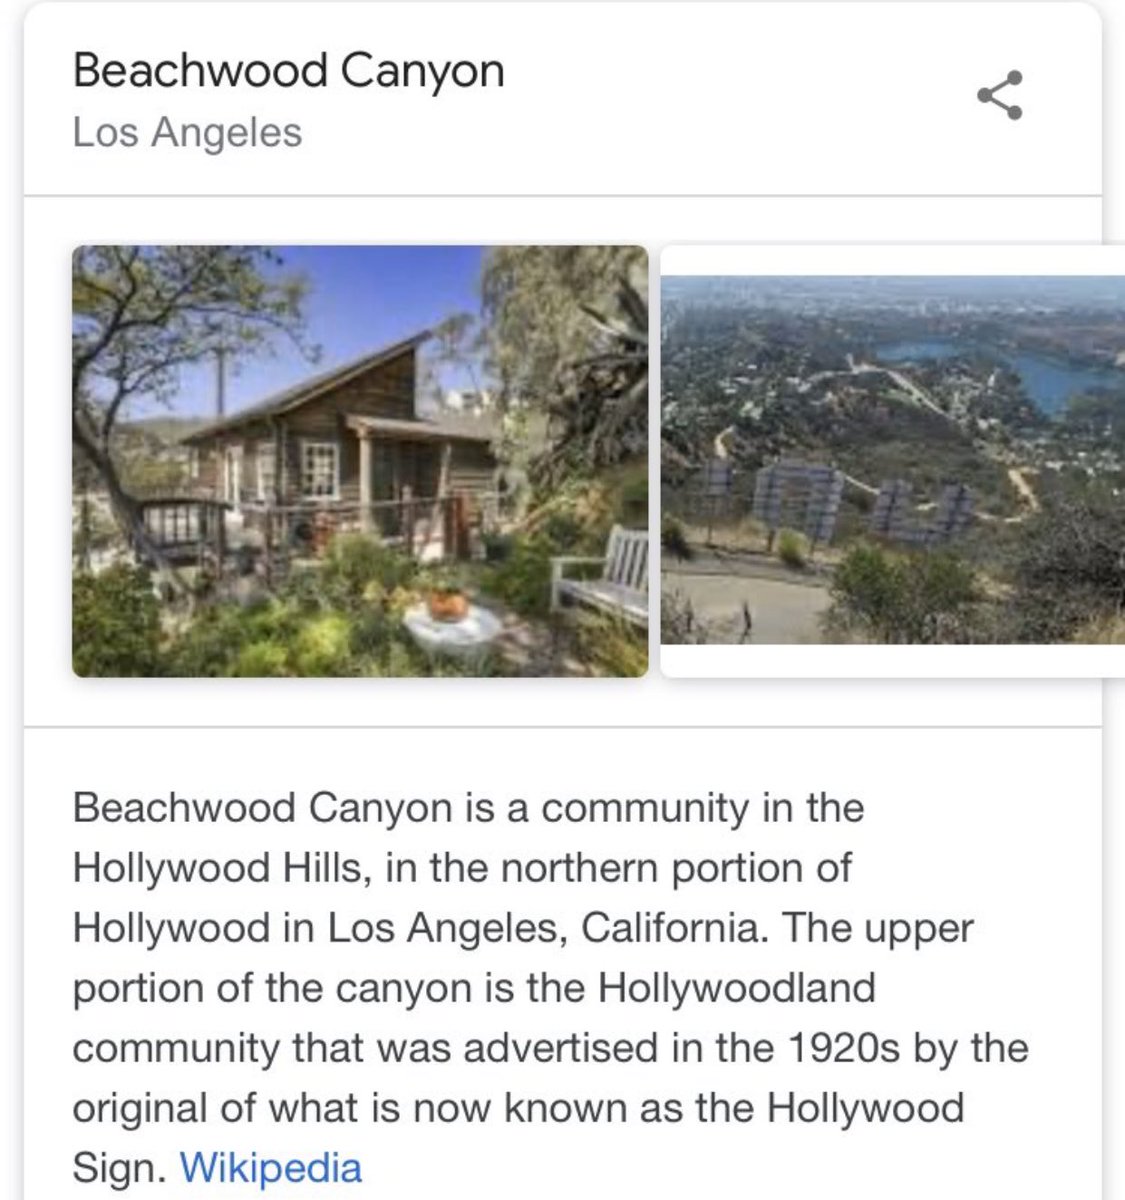 — CANYON MOONThe neighborhood Camille lives in LA it’s called “Beachwood Canyon”.Yes, Beachwood like the café and Canyon as in Canyon Moon. He was not talking about an actual Canyon.